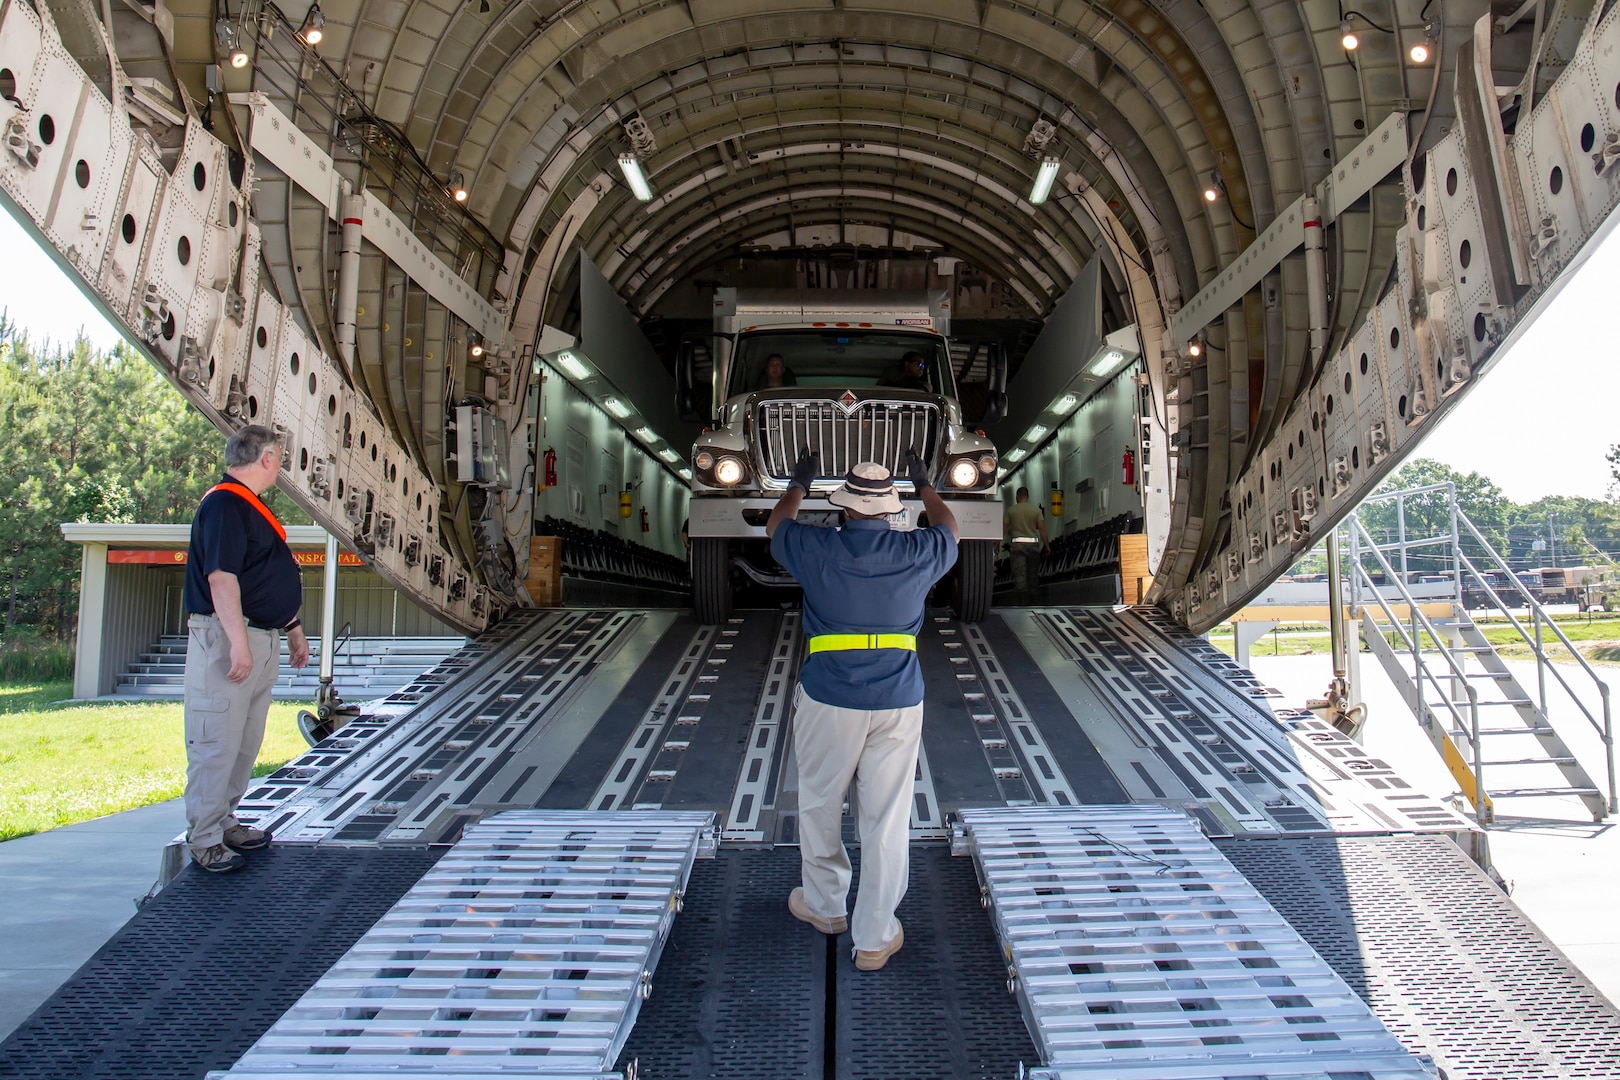 Members of Joint Task Force Civil Support (JTF-CS) participate in a two-day training exercise loading and unloading vehicles on a modified Boeing C-17 Globemaster III. The exercise helped members build the confidence and skills necessary to safely and successfully deploy. JTF-CS provides command and control for designated Department of Defense specialized response forces to assist local, state, federal and tribal partners in saving lives, preventing further injury, and providing critical support to enable community recovery. (Official Department of Defense photo by Mass Communication Specialist 3rd Class Michael Redd/released)